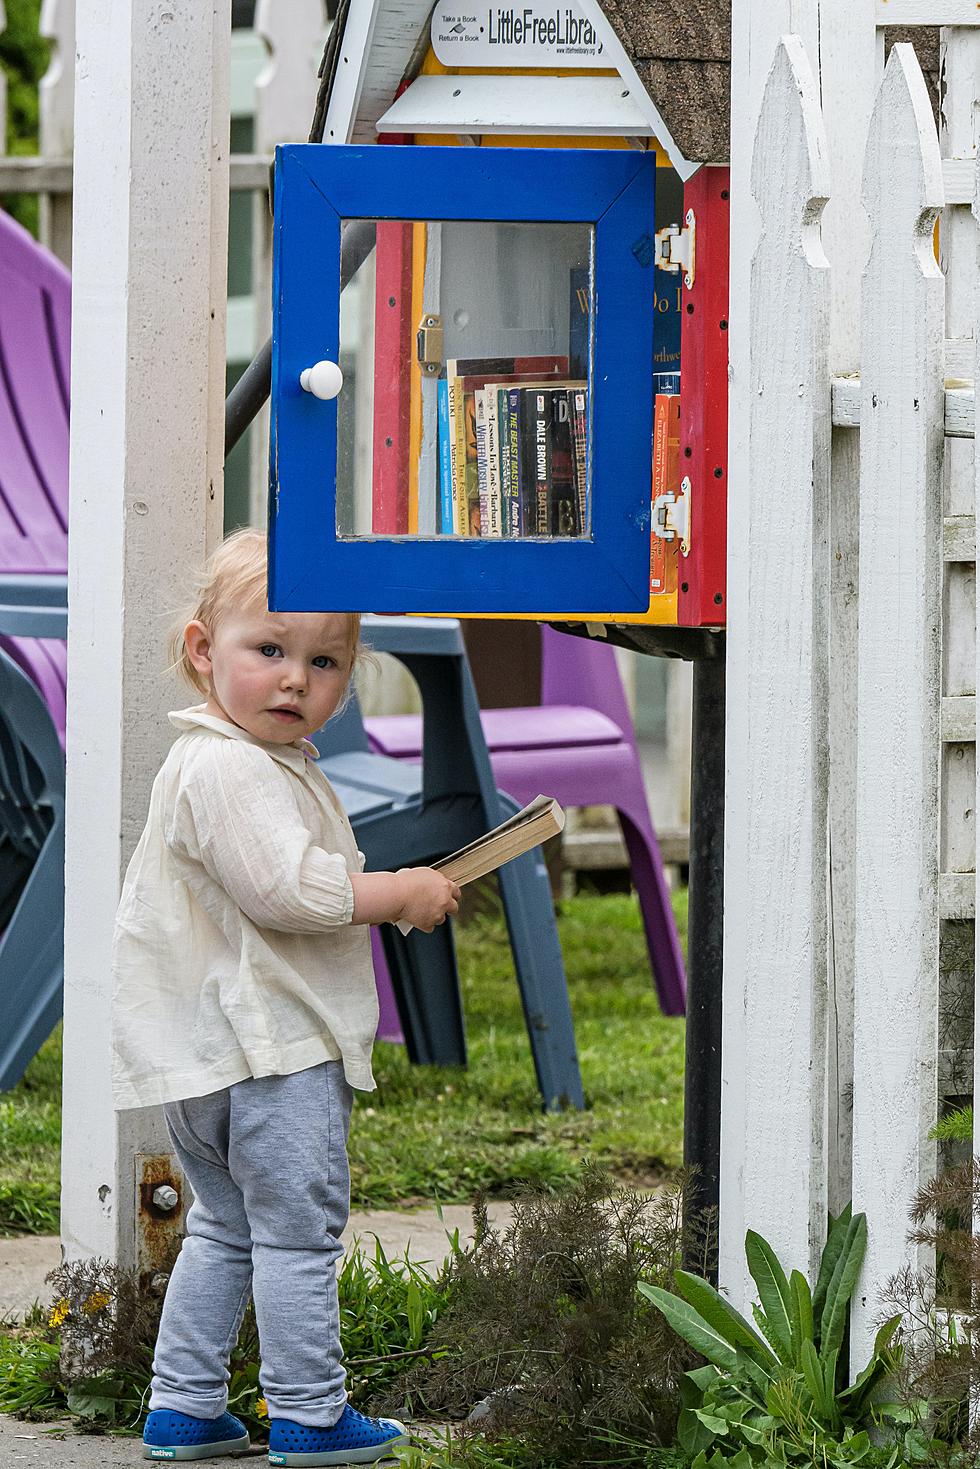 Where to Find All of the Little Free Libraries in Fort Collins